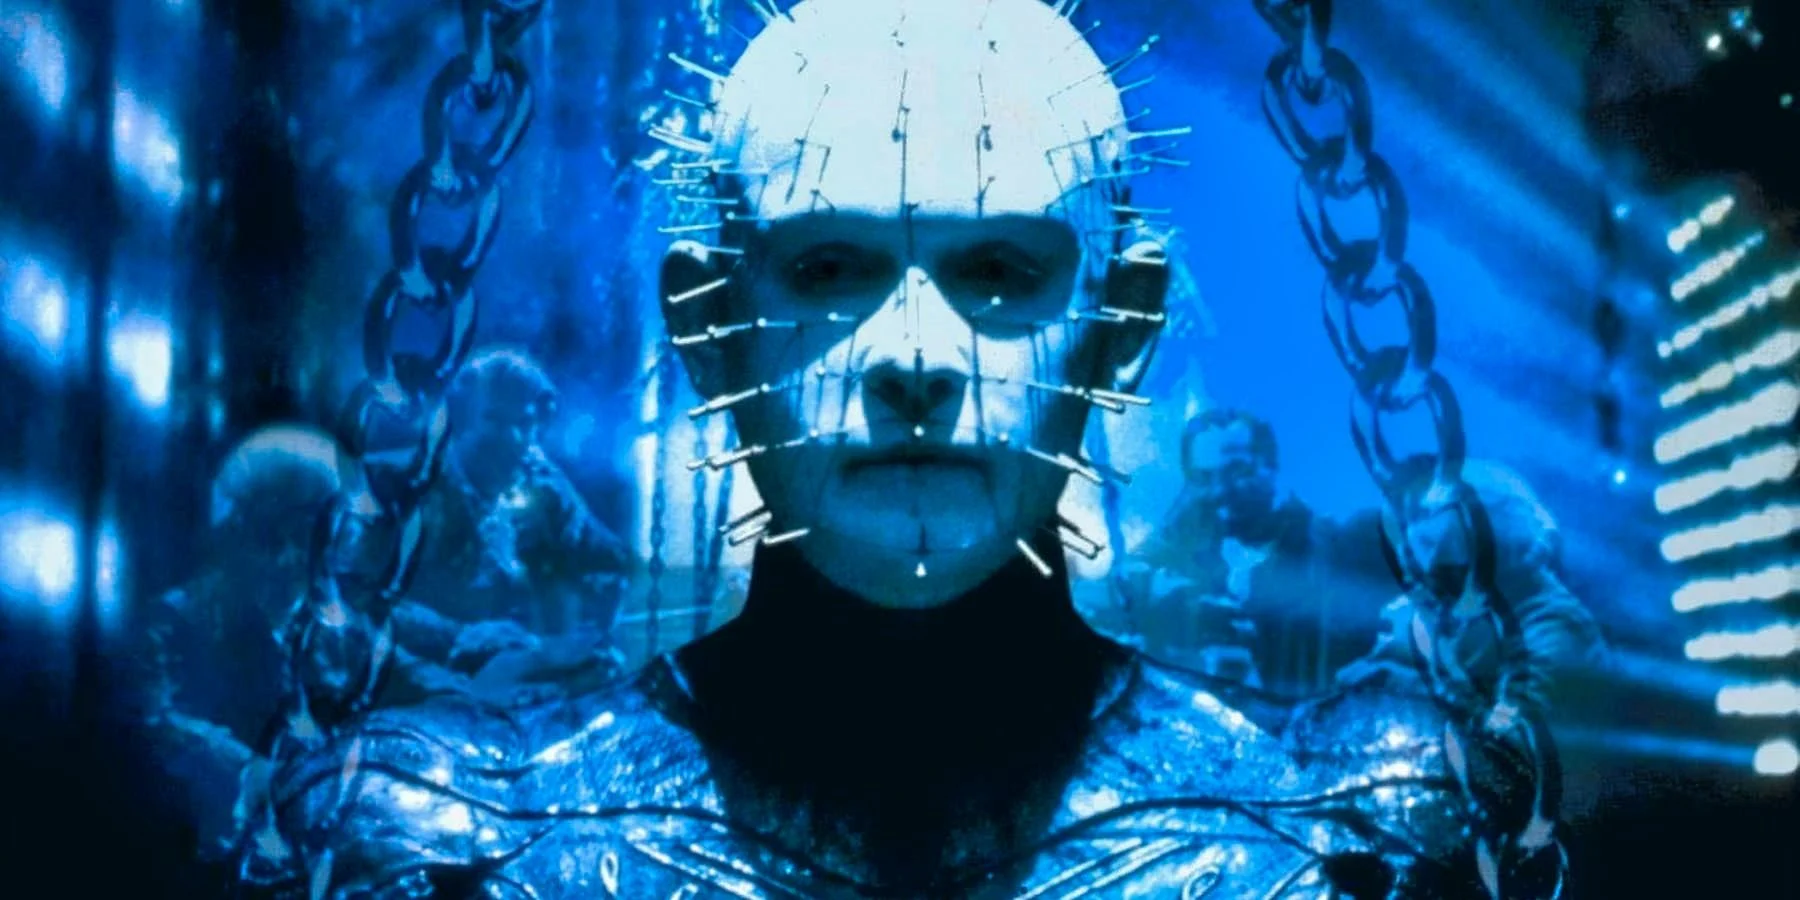 Major crossover opportunities were missed with Hellraiser